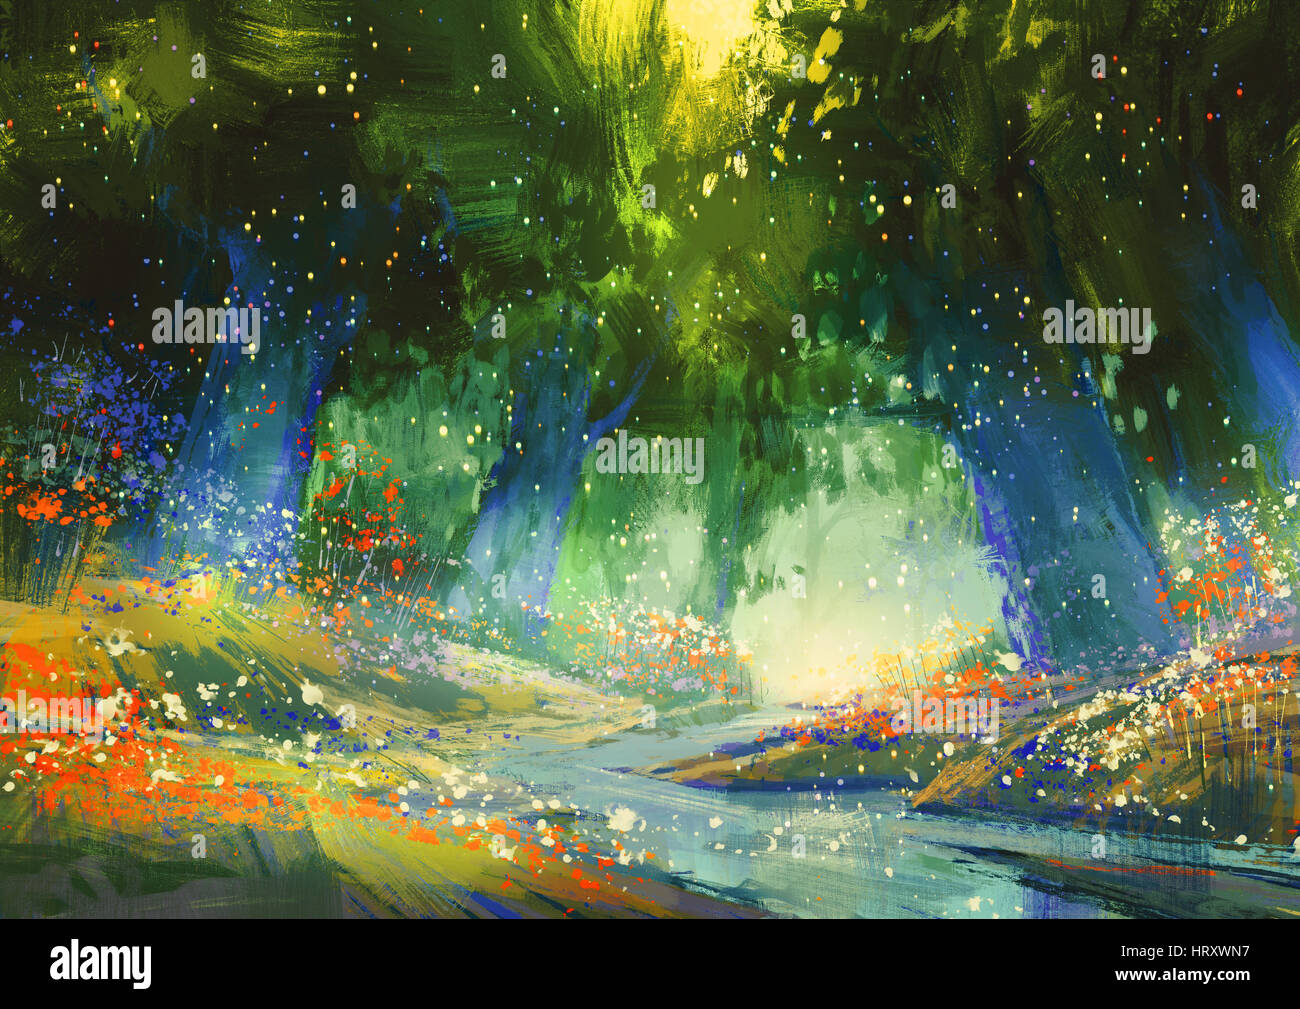 mystic blue and green forest with a fantasy atmosphere,illustration painting Stock Photo